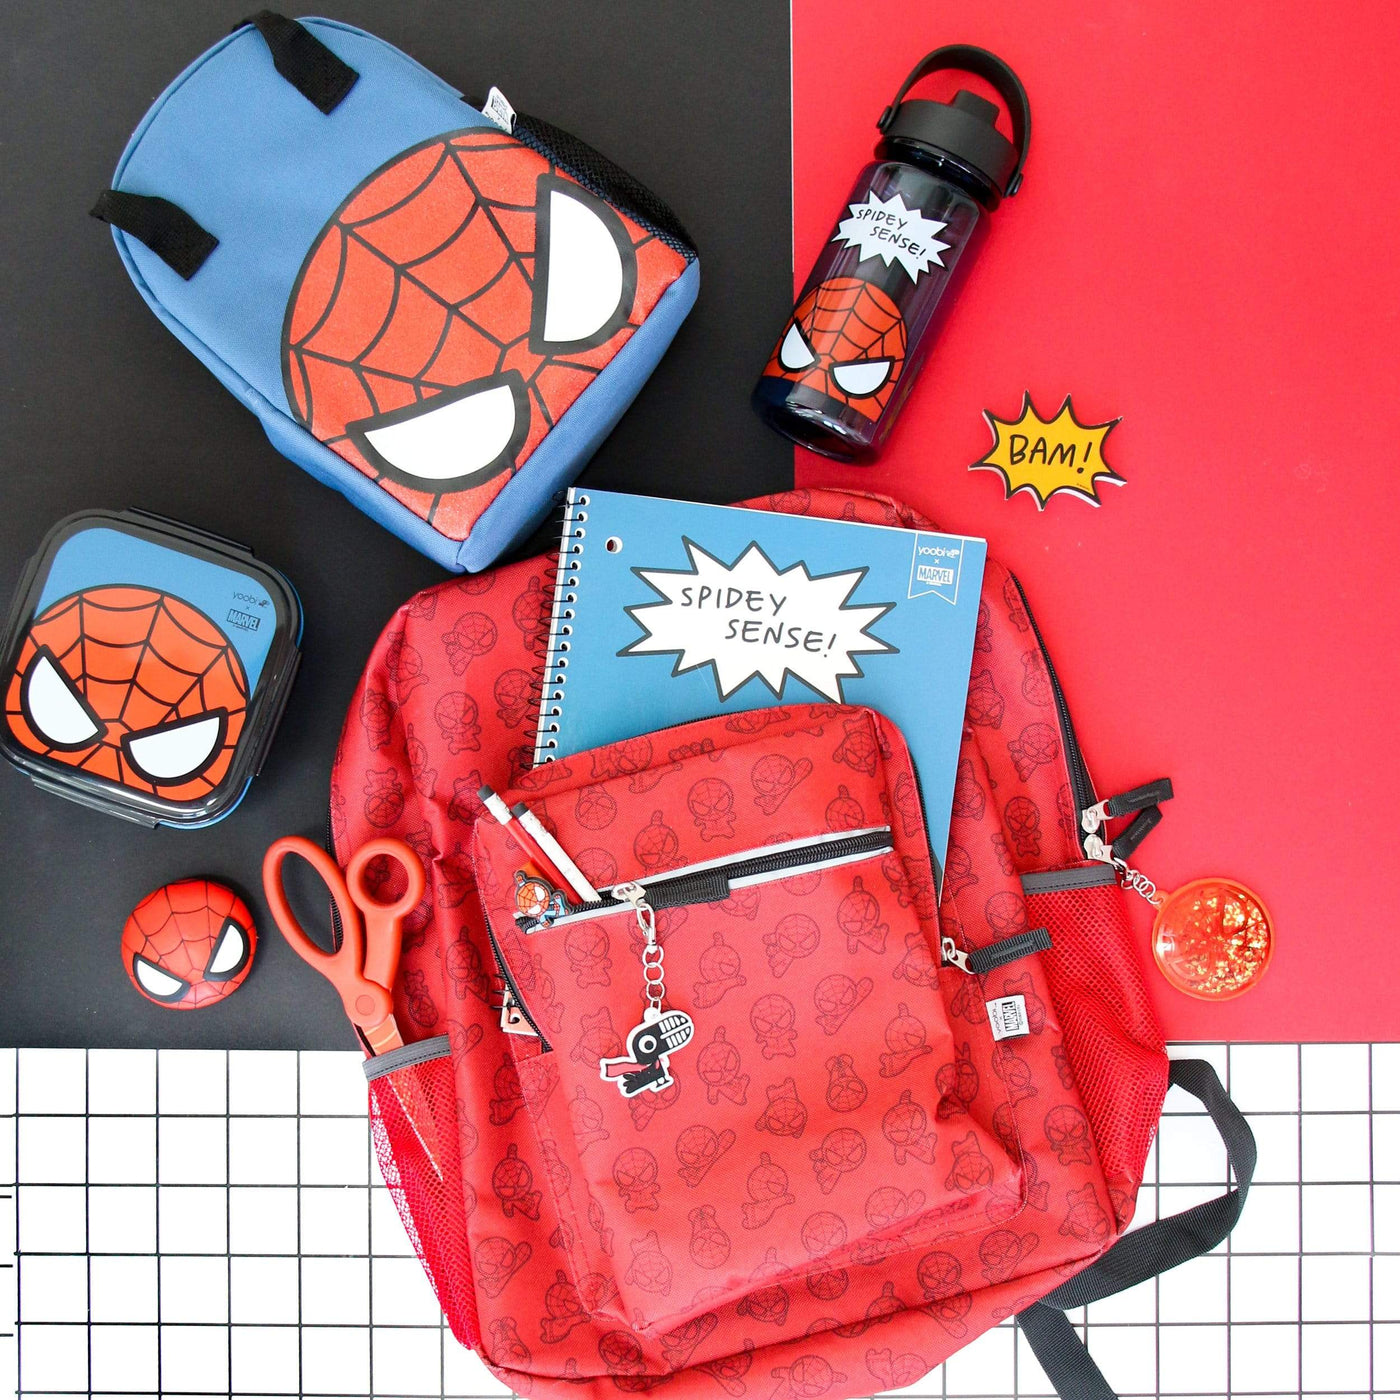 lifestyle image of Spider-Man bento box shown with Spider-Man backpack and lunch bag